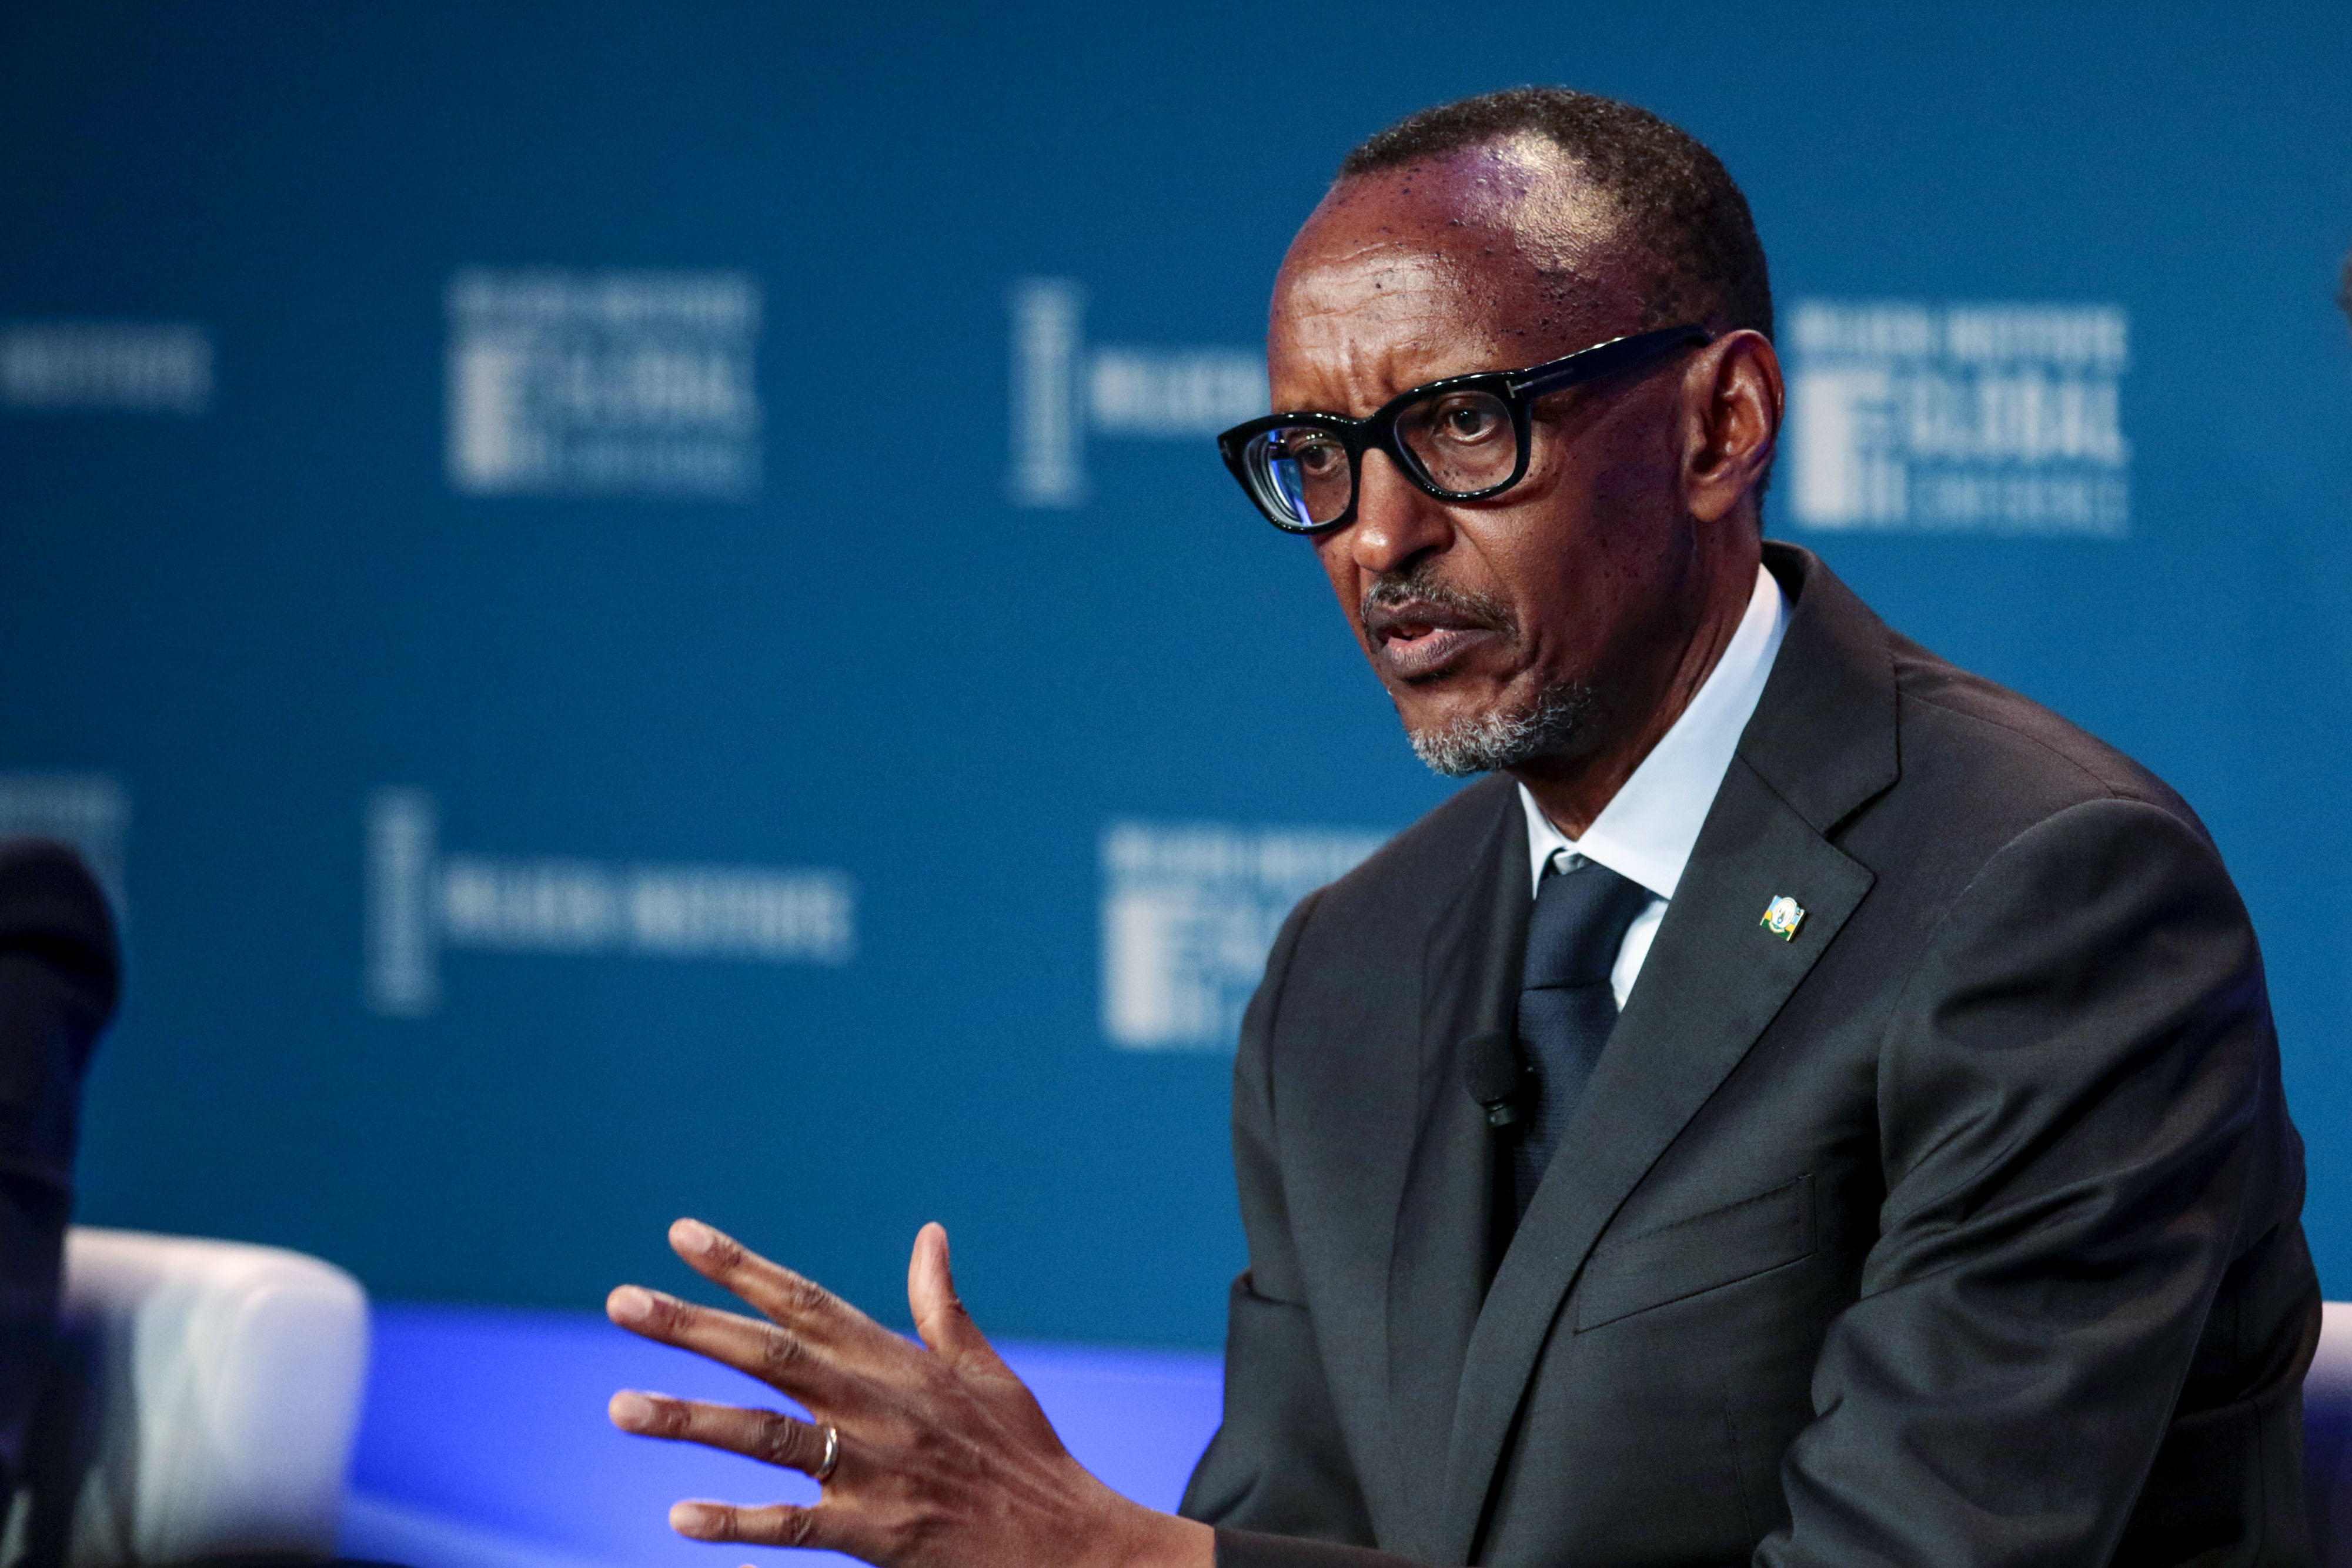 Kagame Increases Calls for Vaccine Production in Africa